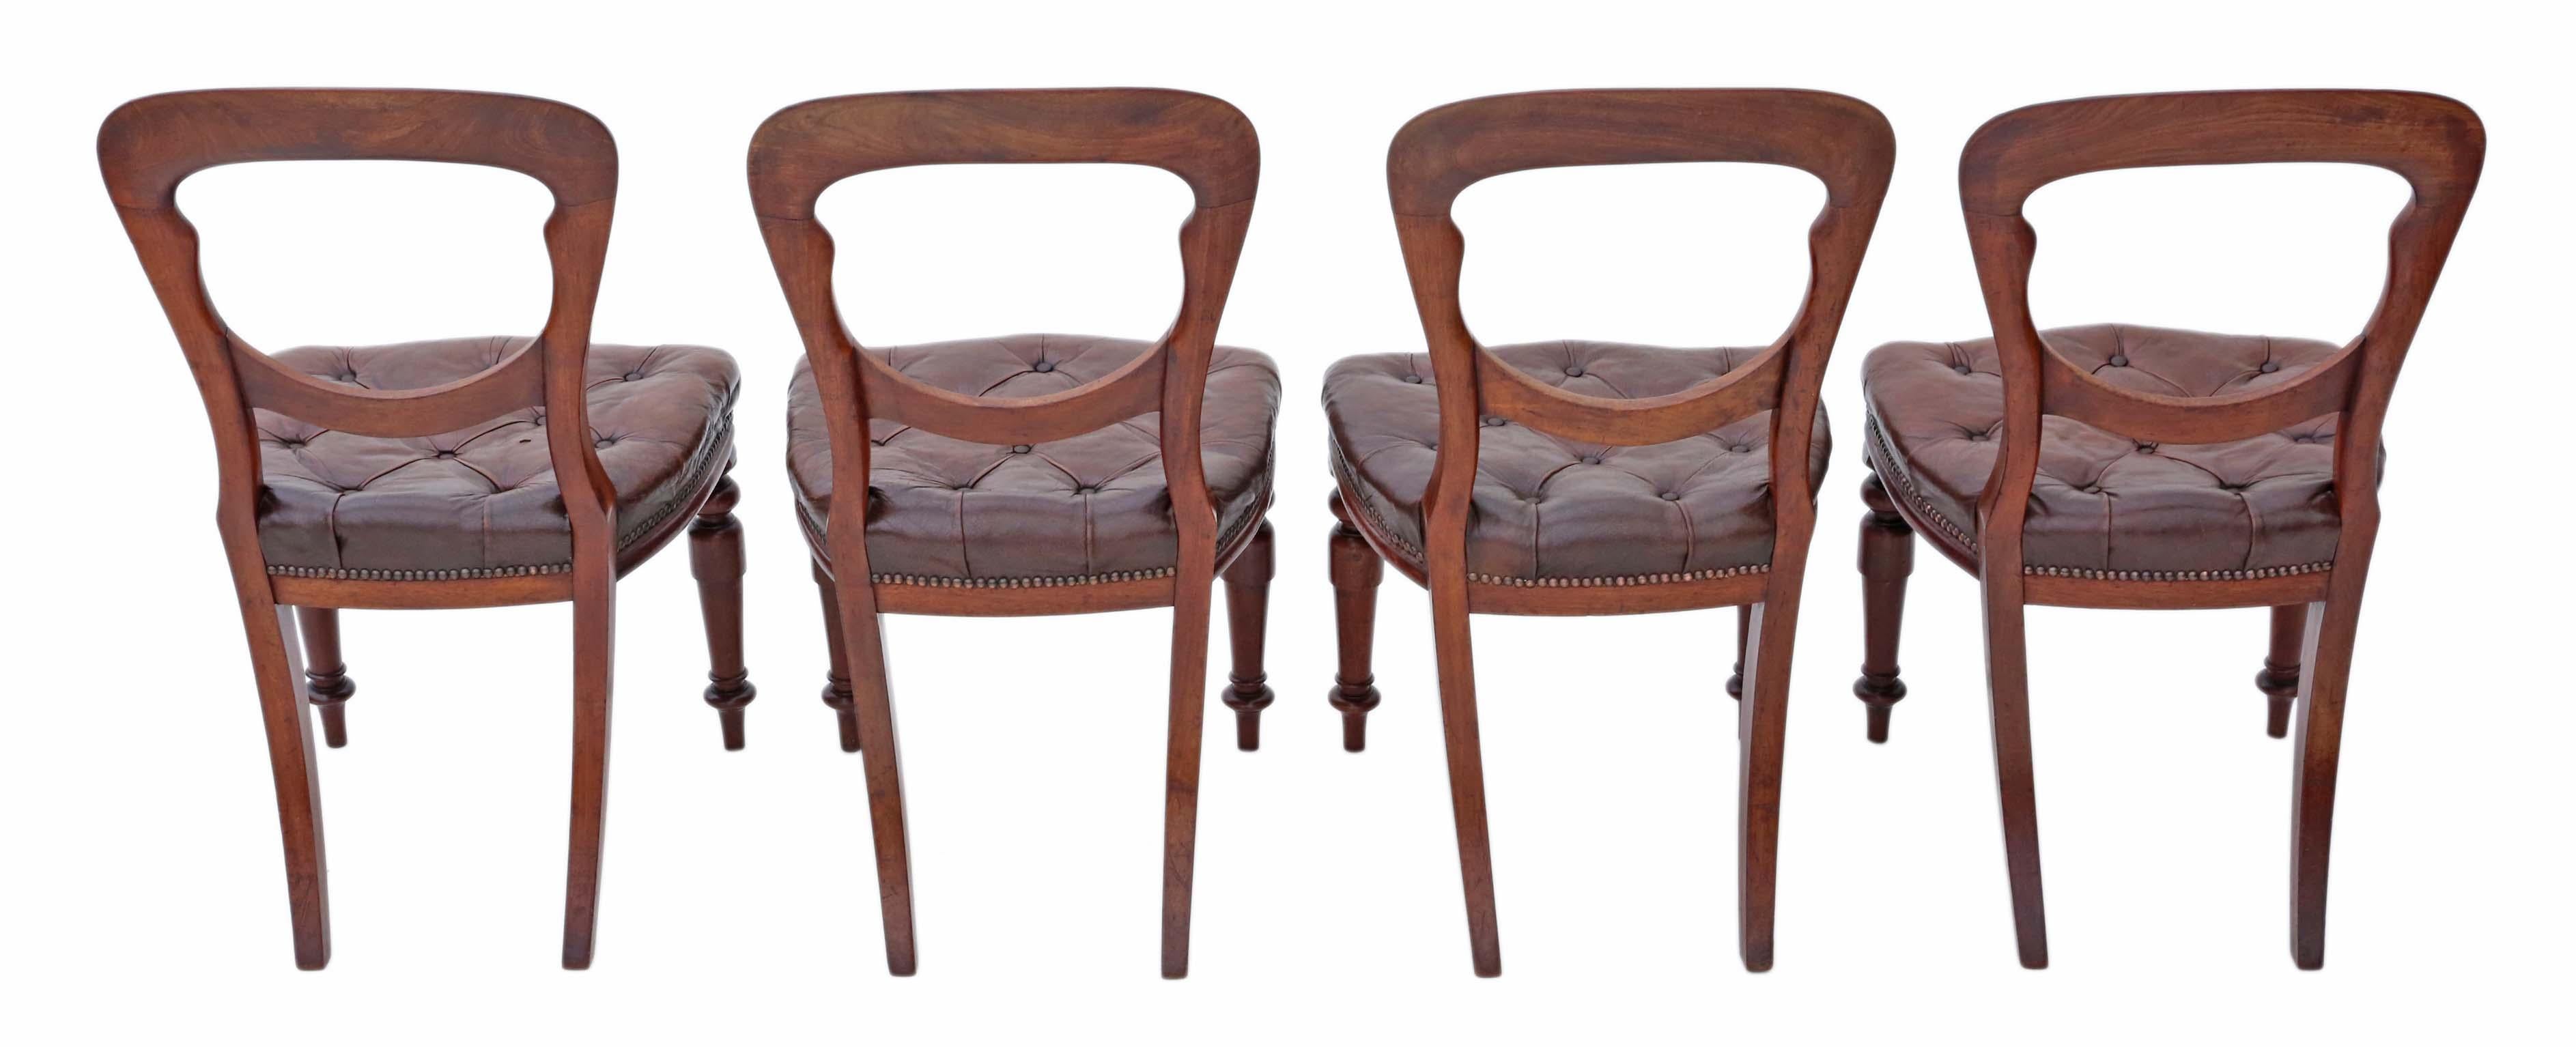 Antique quality set of 4 Victorian circa 880 mahogany dining chairs.
Solid, heavy and strong, with no loose joints. Deep button patinated brown leather upholstery. Very decorative. No woodworm.
Would look great in the right location!
Overall